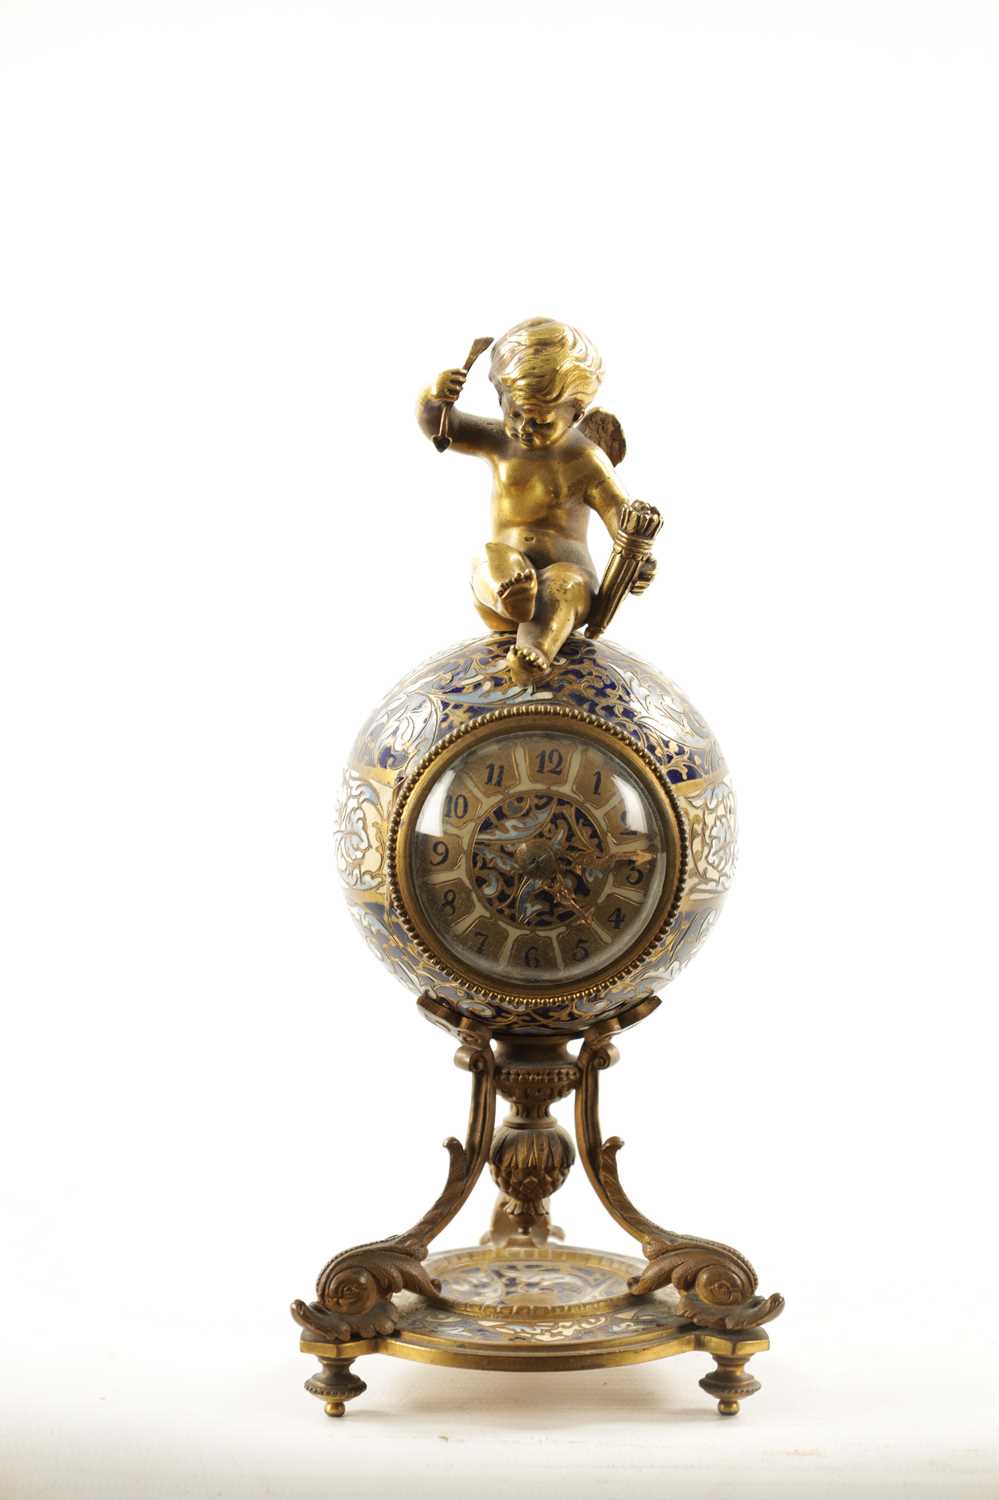 A LATE 19TH CENTURY FRENCH ORMOLU CHAMPLEVE ENAMEL MANTEL CLOCK - Image 2 of 8